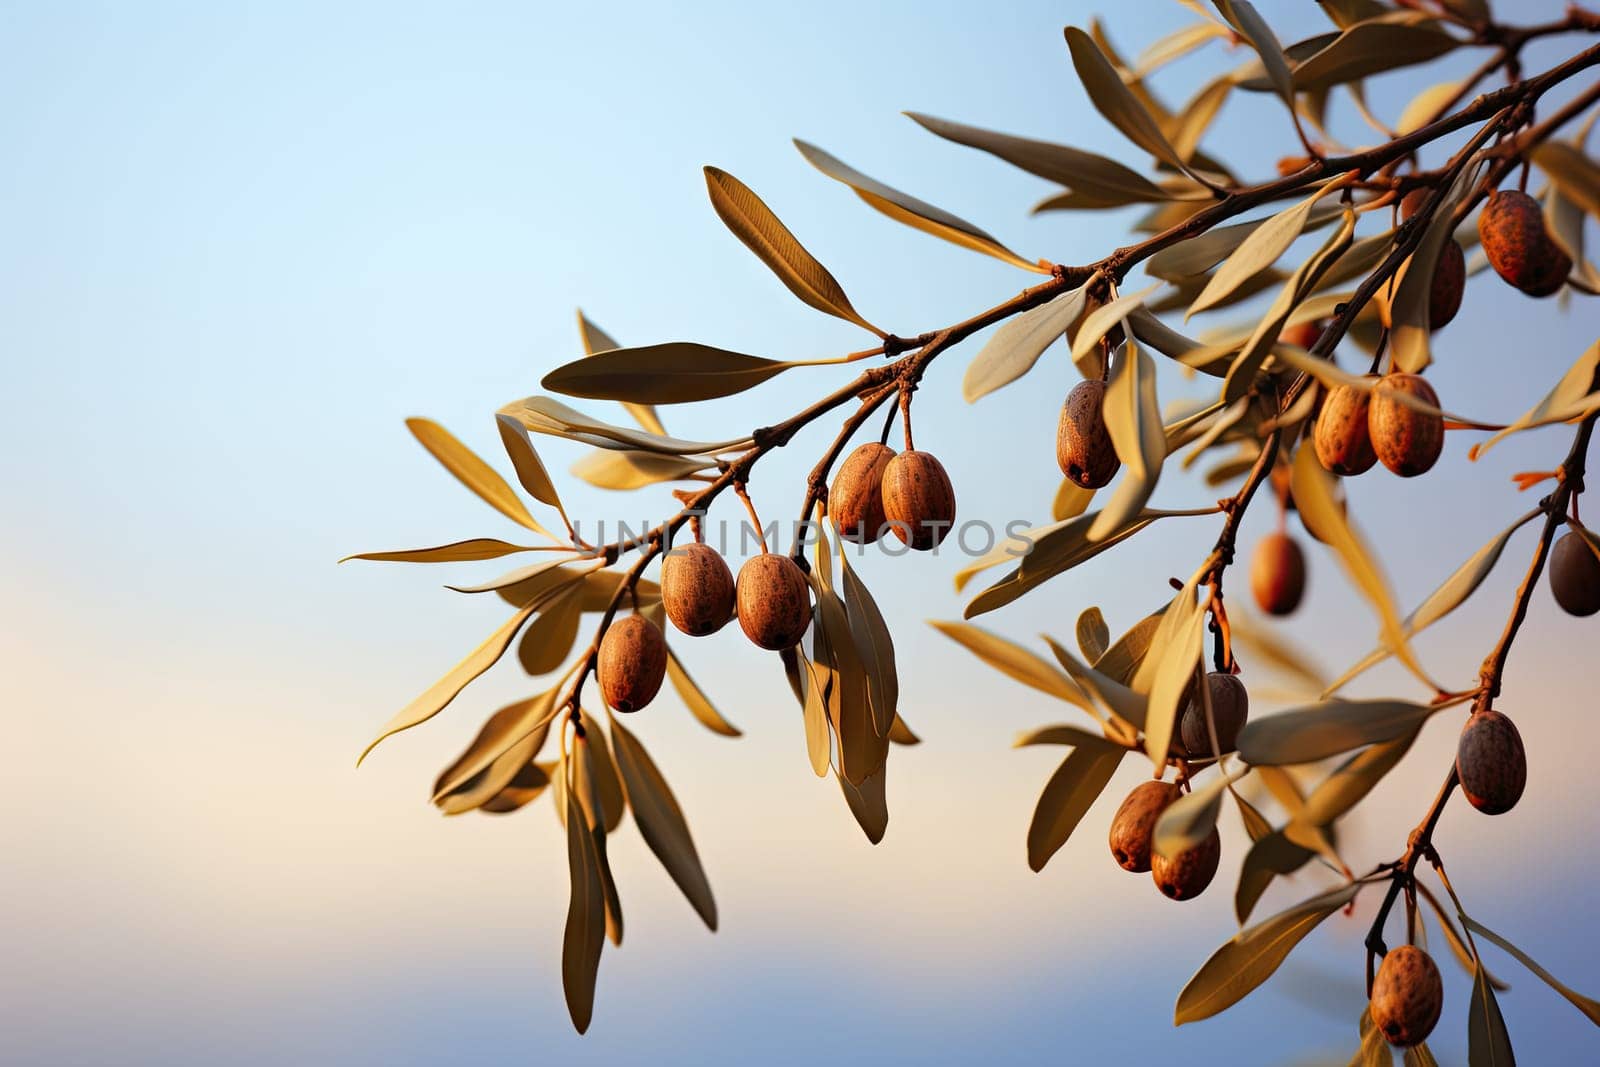 an image of olives hanging from a tree branch by golibtolibov